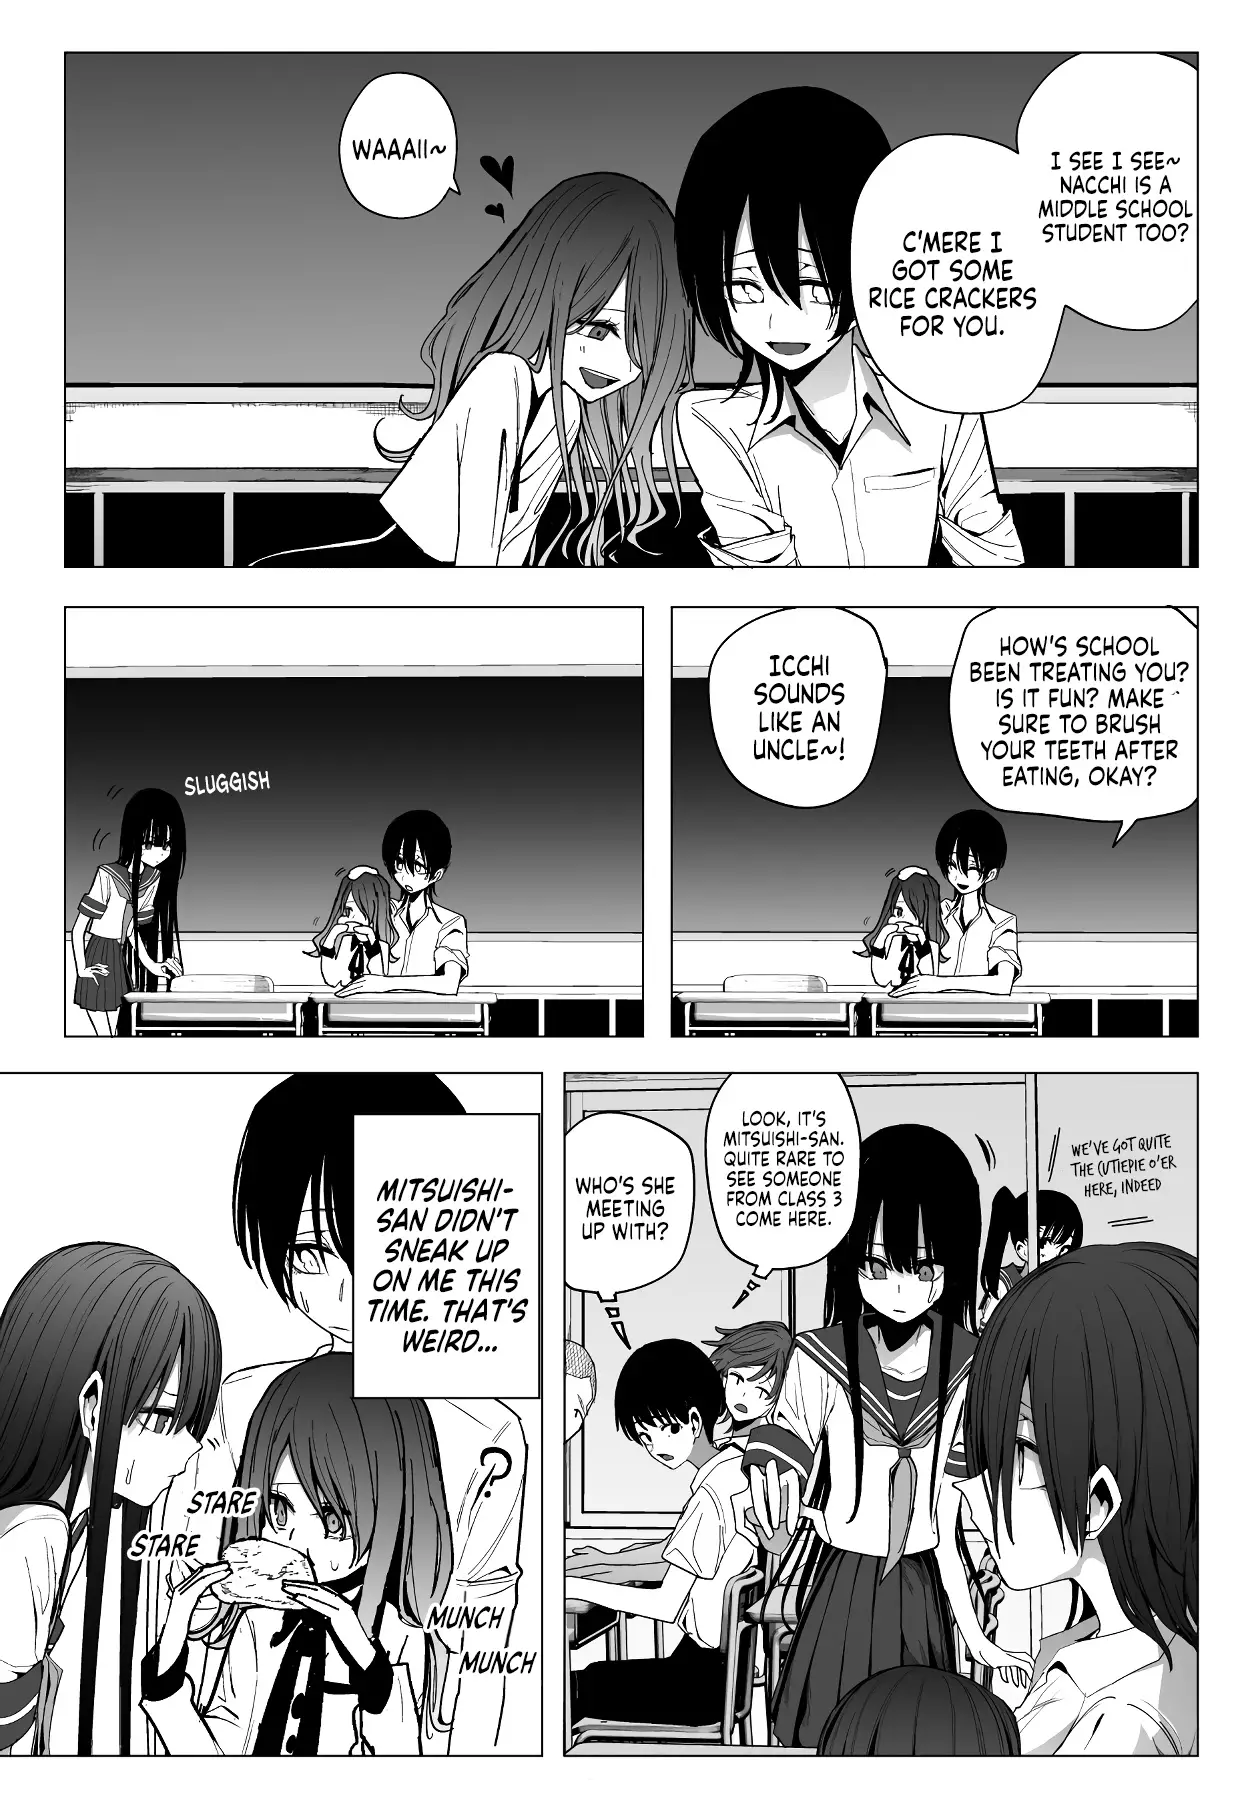 Mitsuishi-San Is Being Weird This Year - 24 page 5-7d003127